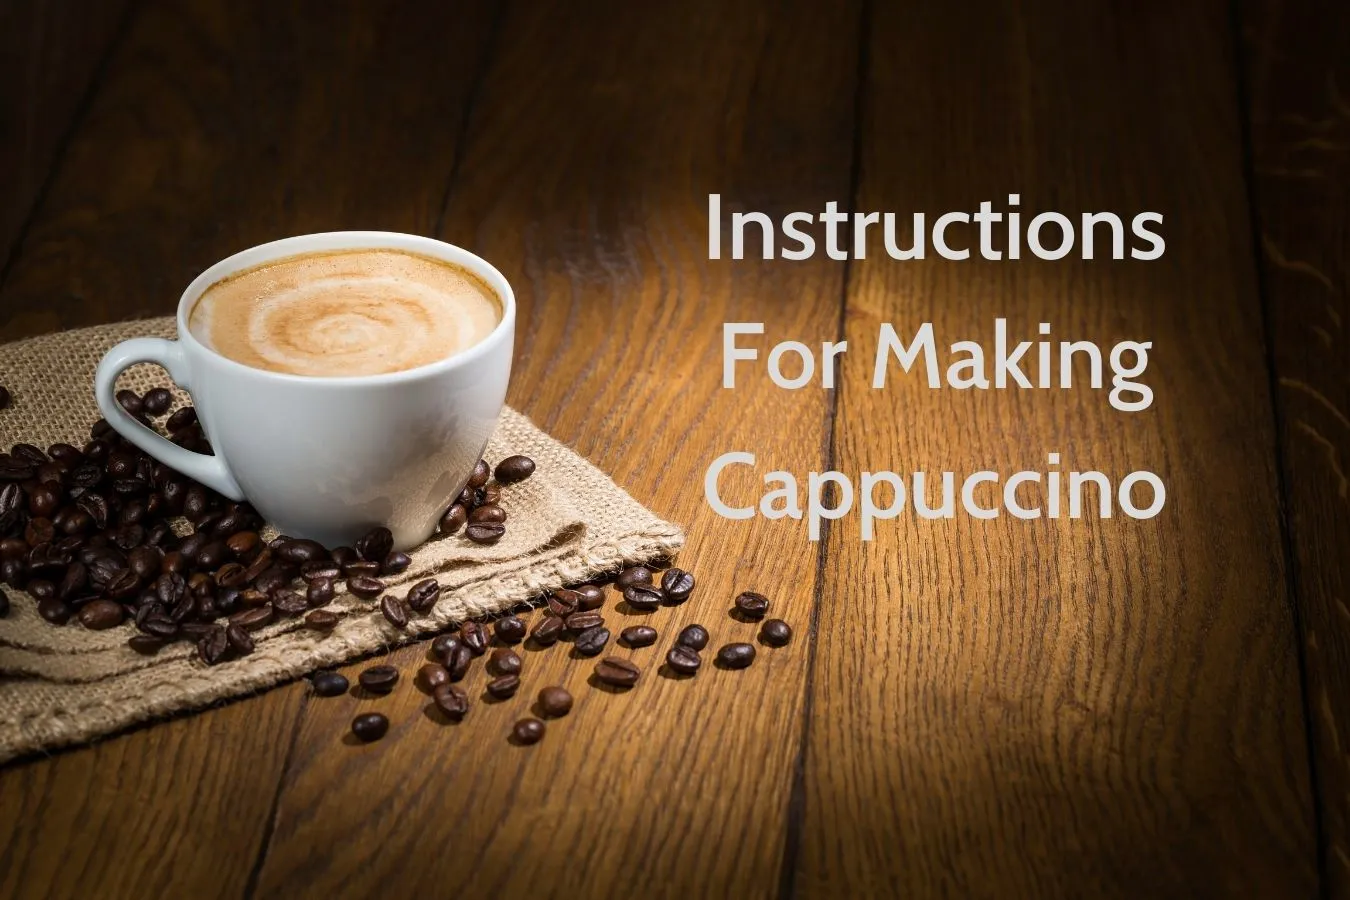 Instructions For Making Cappuccino